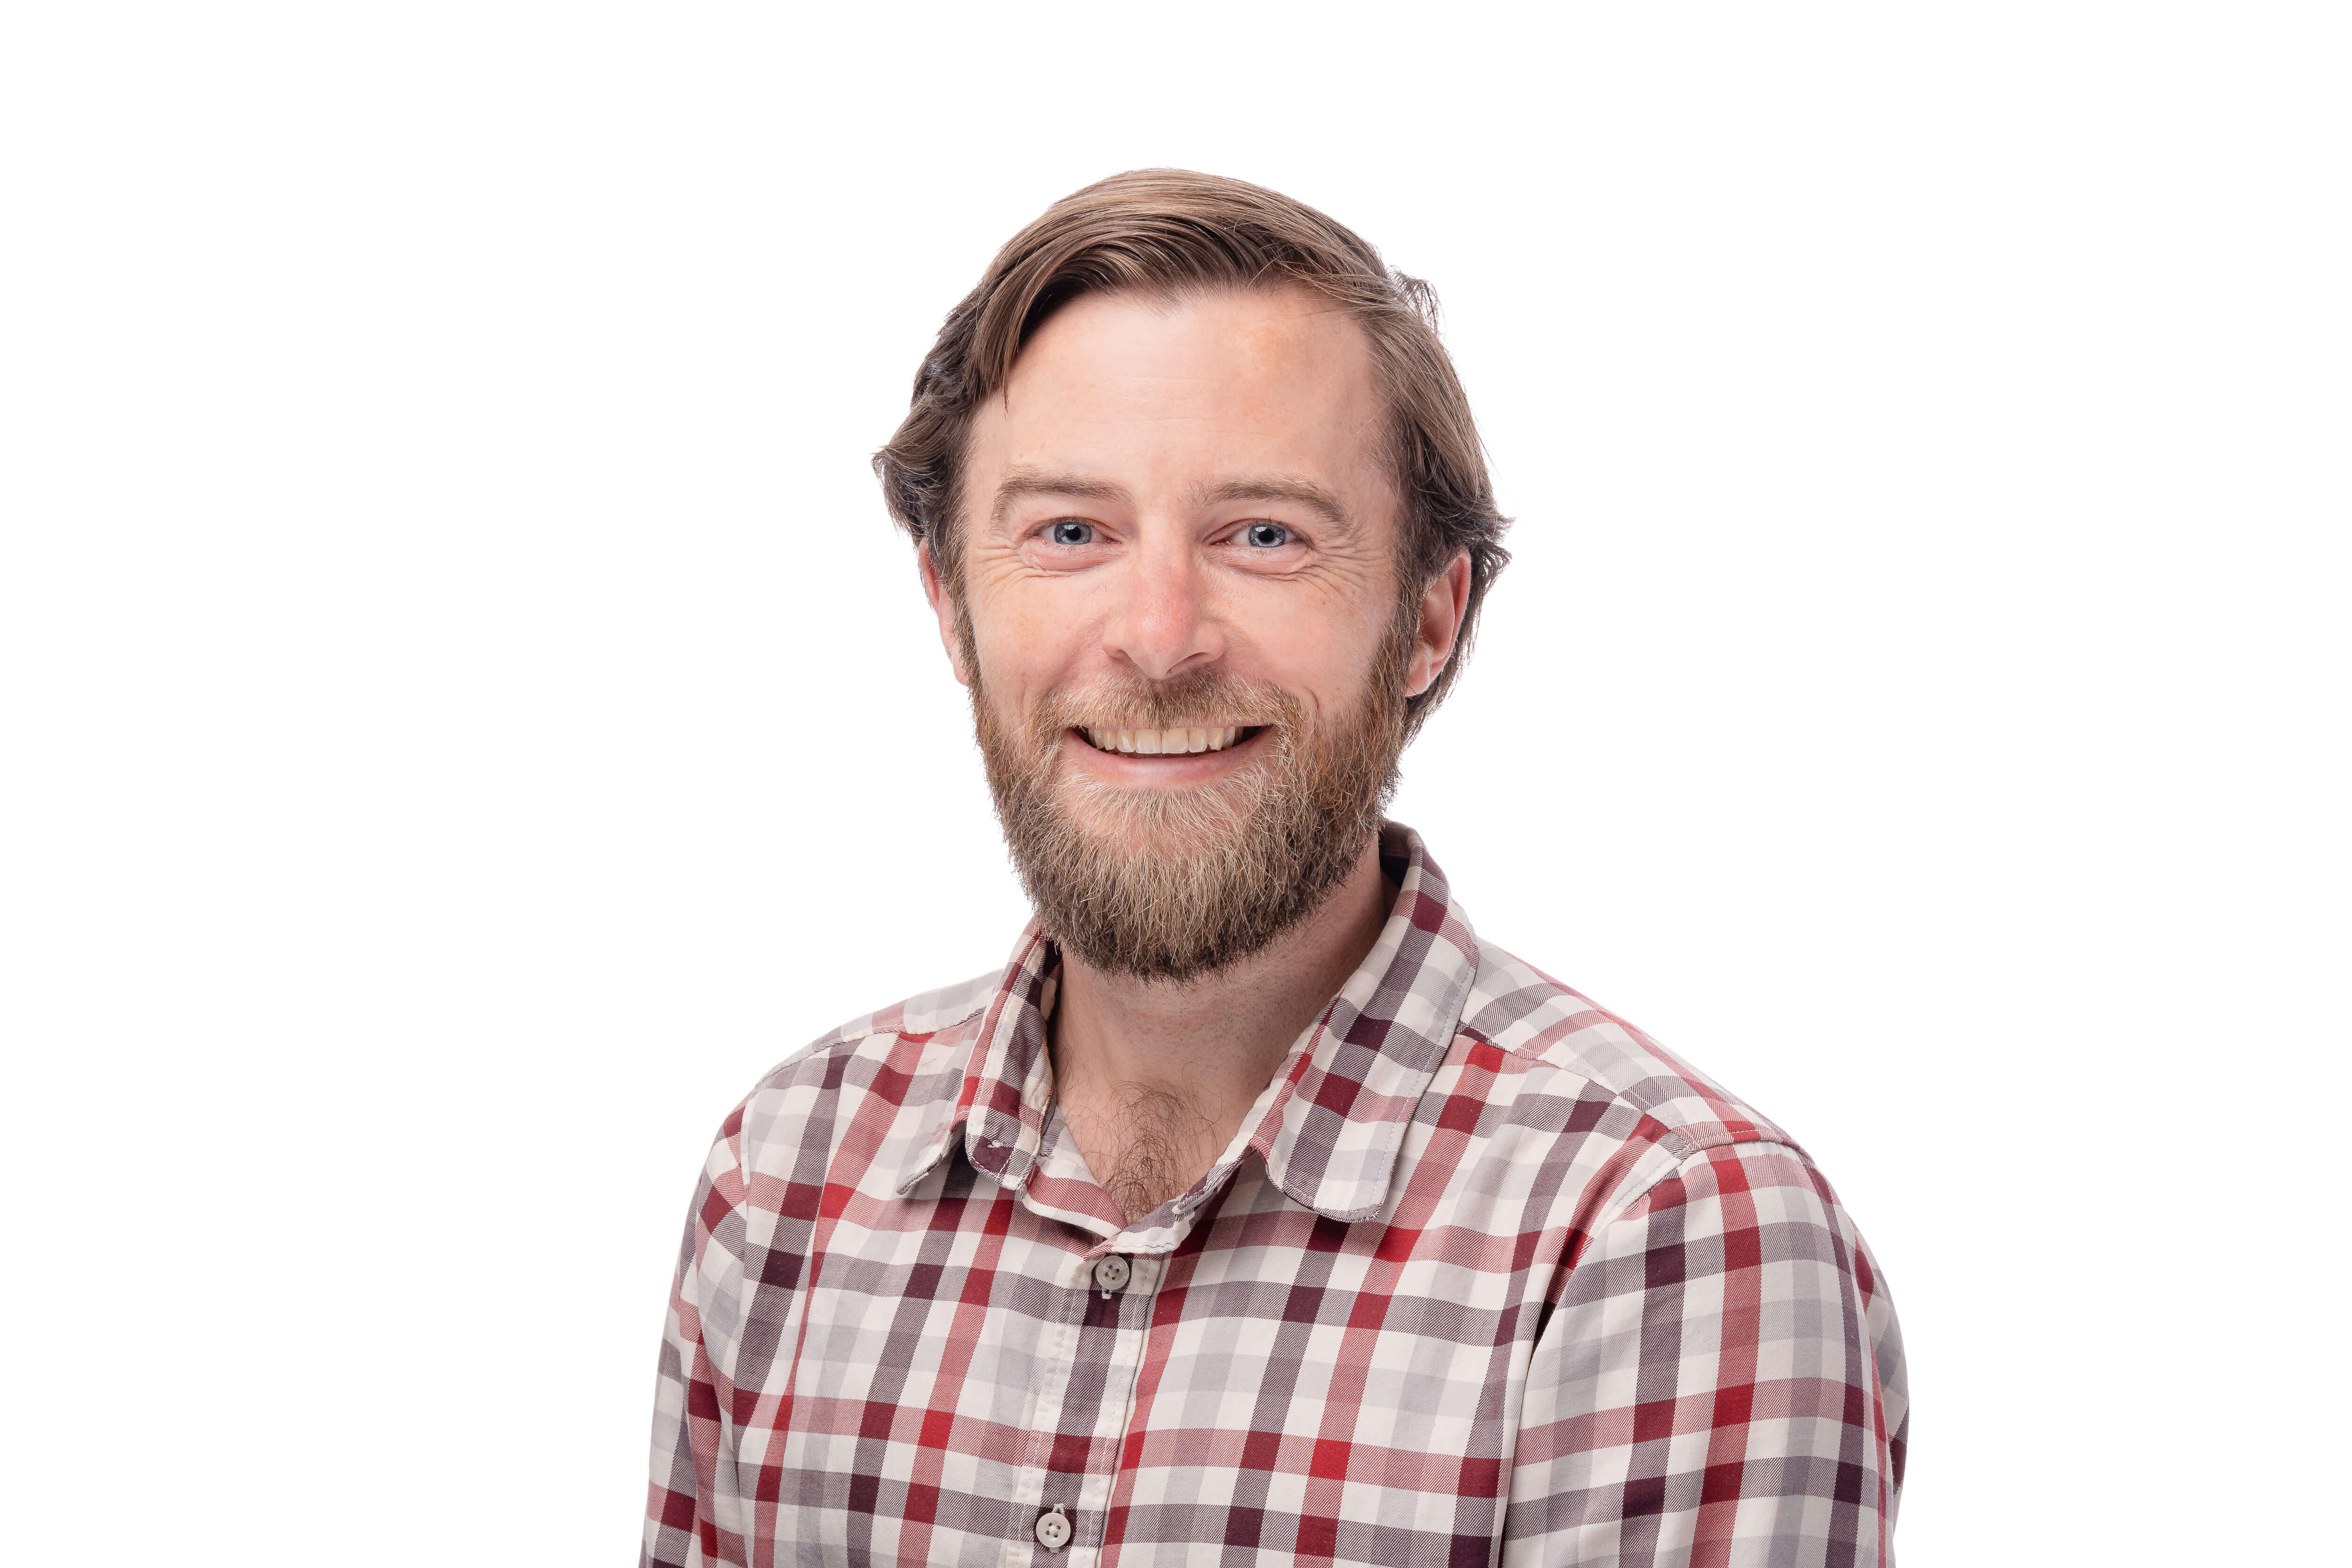 A headshot of a man with a beard and a warm smile, wearing a checked shirt. His casual, approachable demeanor is enhanced by the crisp white background.